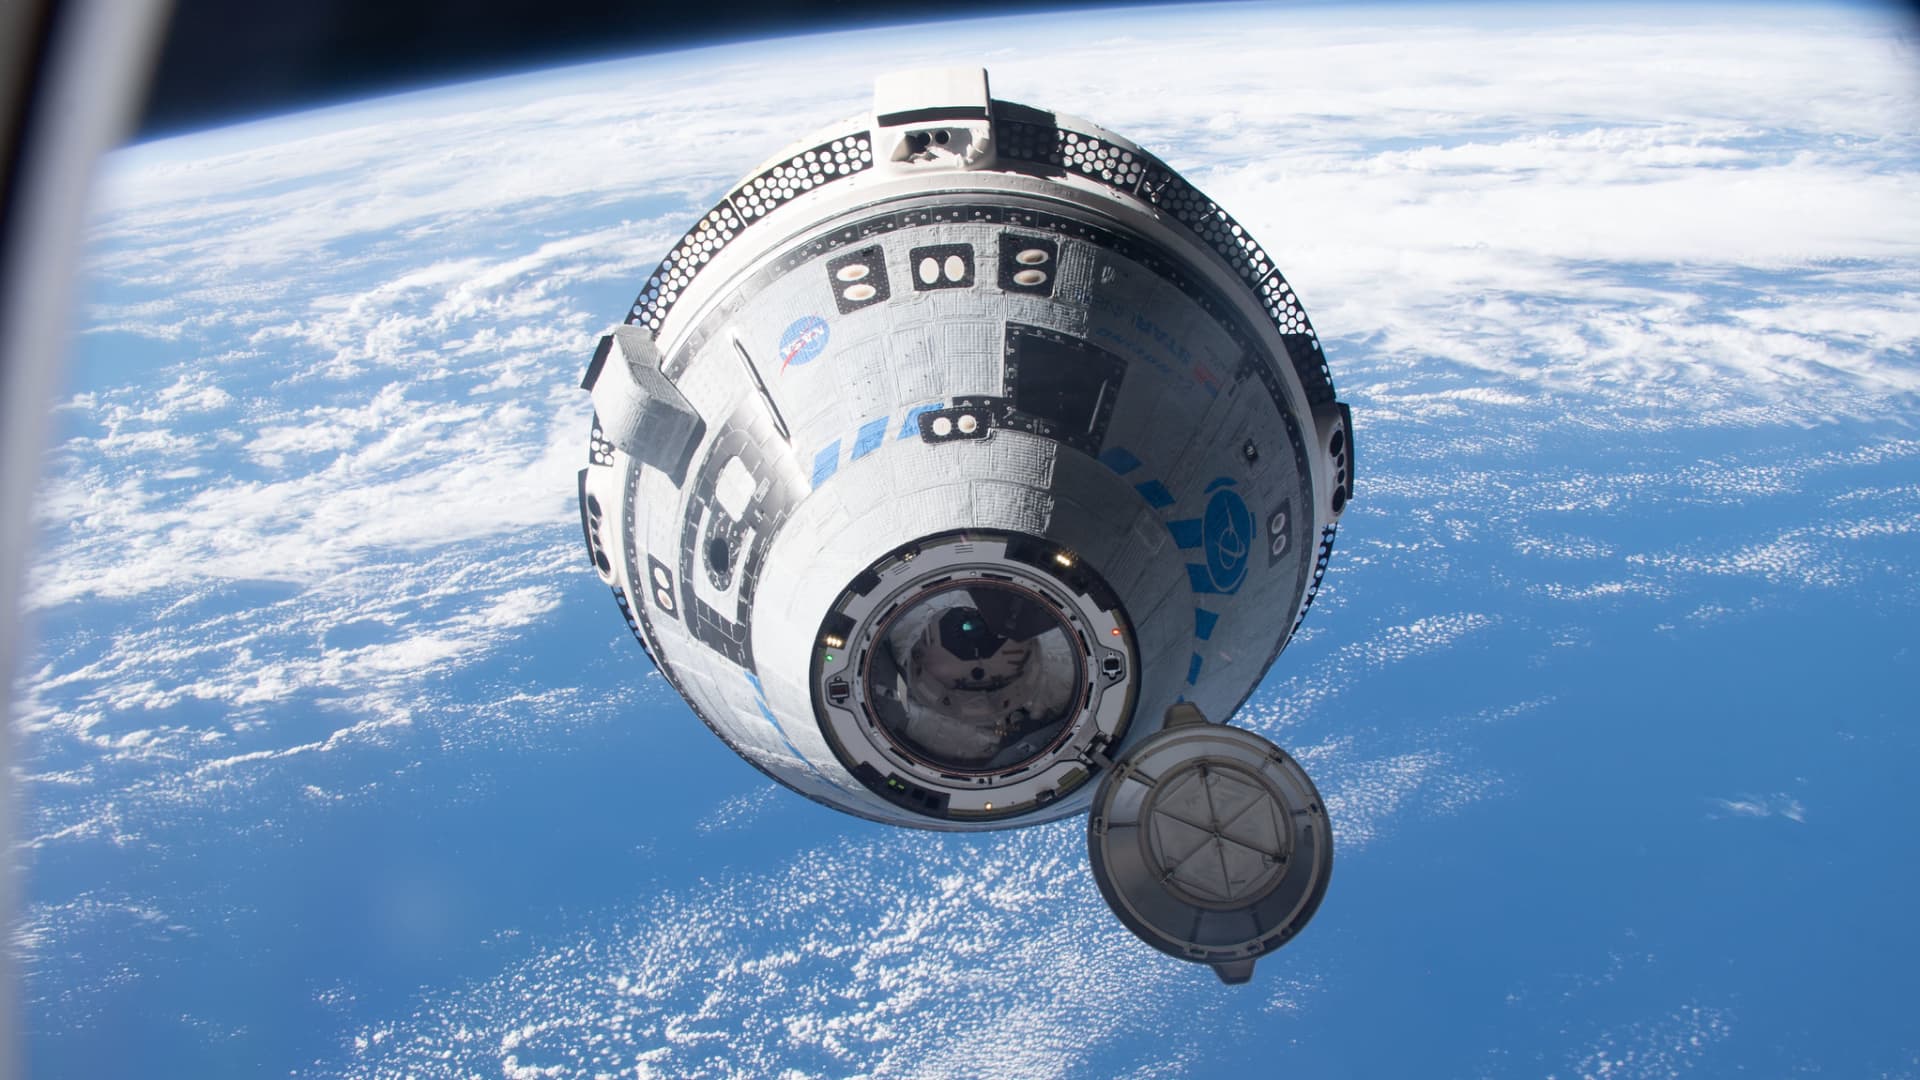 Boeing’s Starliner losses total $1.5 billion with NASA astronauts still waiting to fly